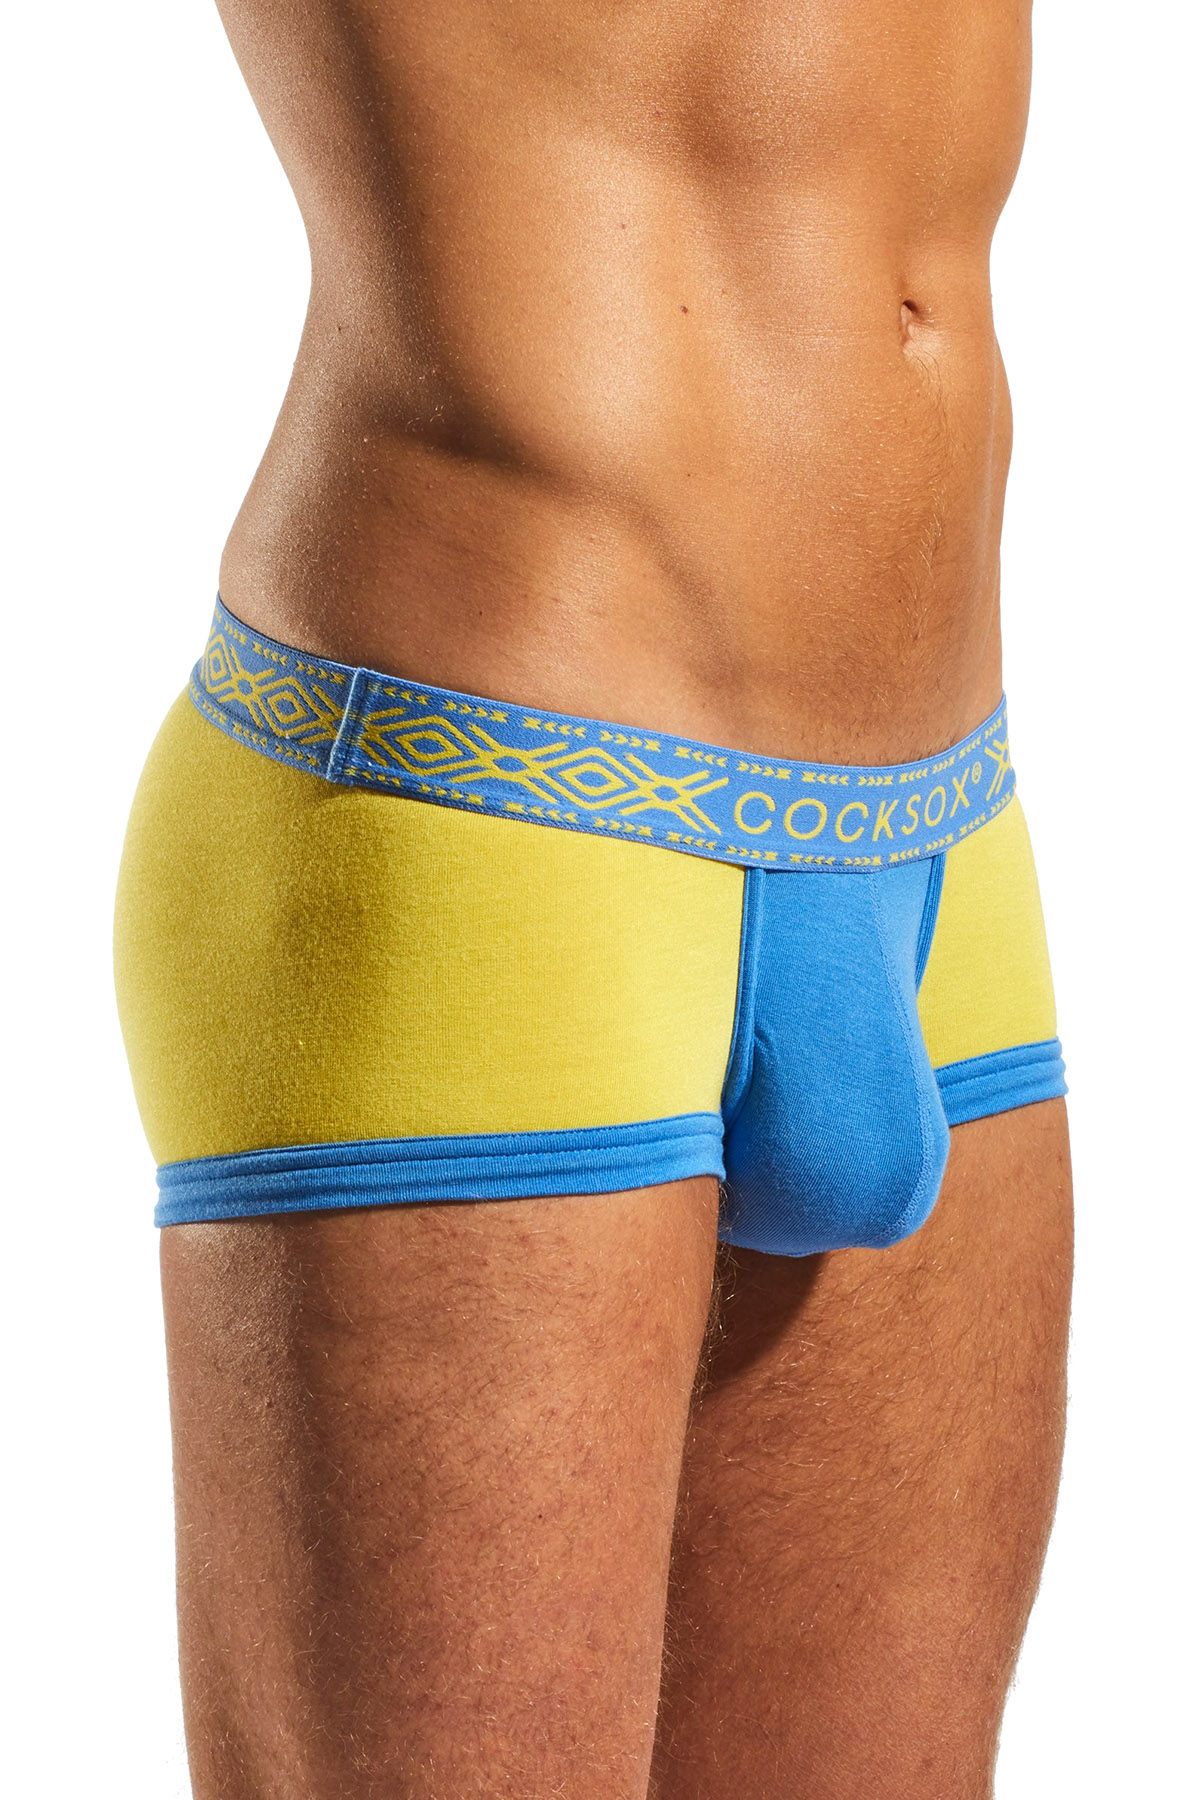 Cocksox Woad Modal Enhancing Pouch Norse Trunk